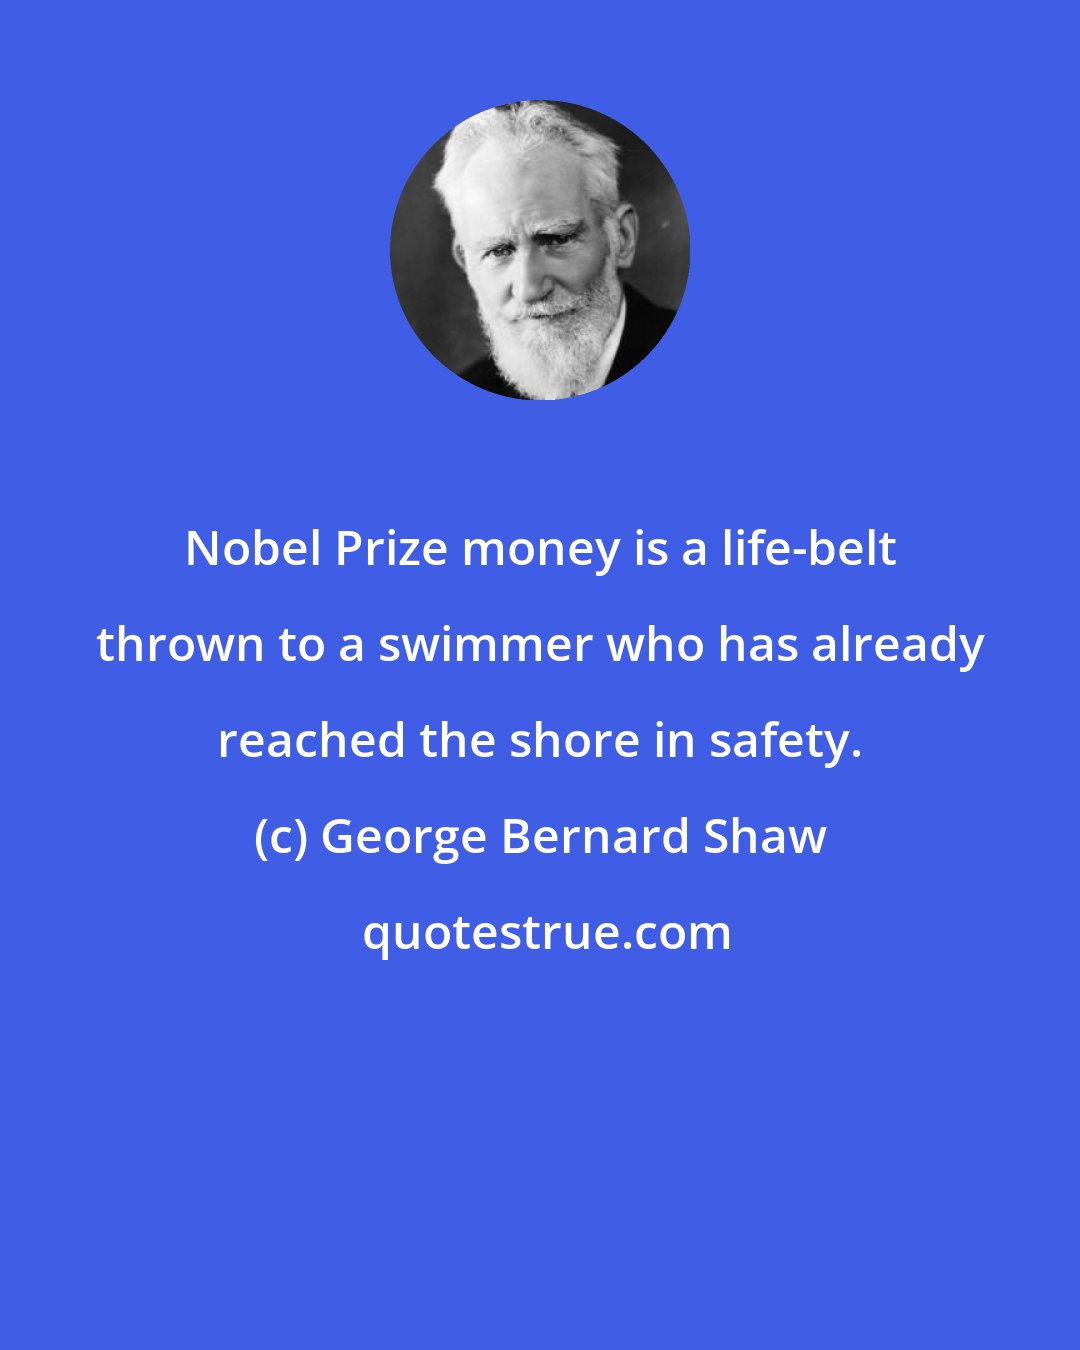 George Bernard Shaw: Nobel Prize money is a life-belt thrown to a swimmer who has already reached the shore in safety.